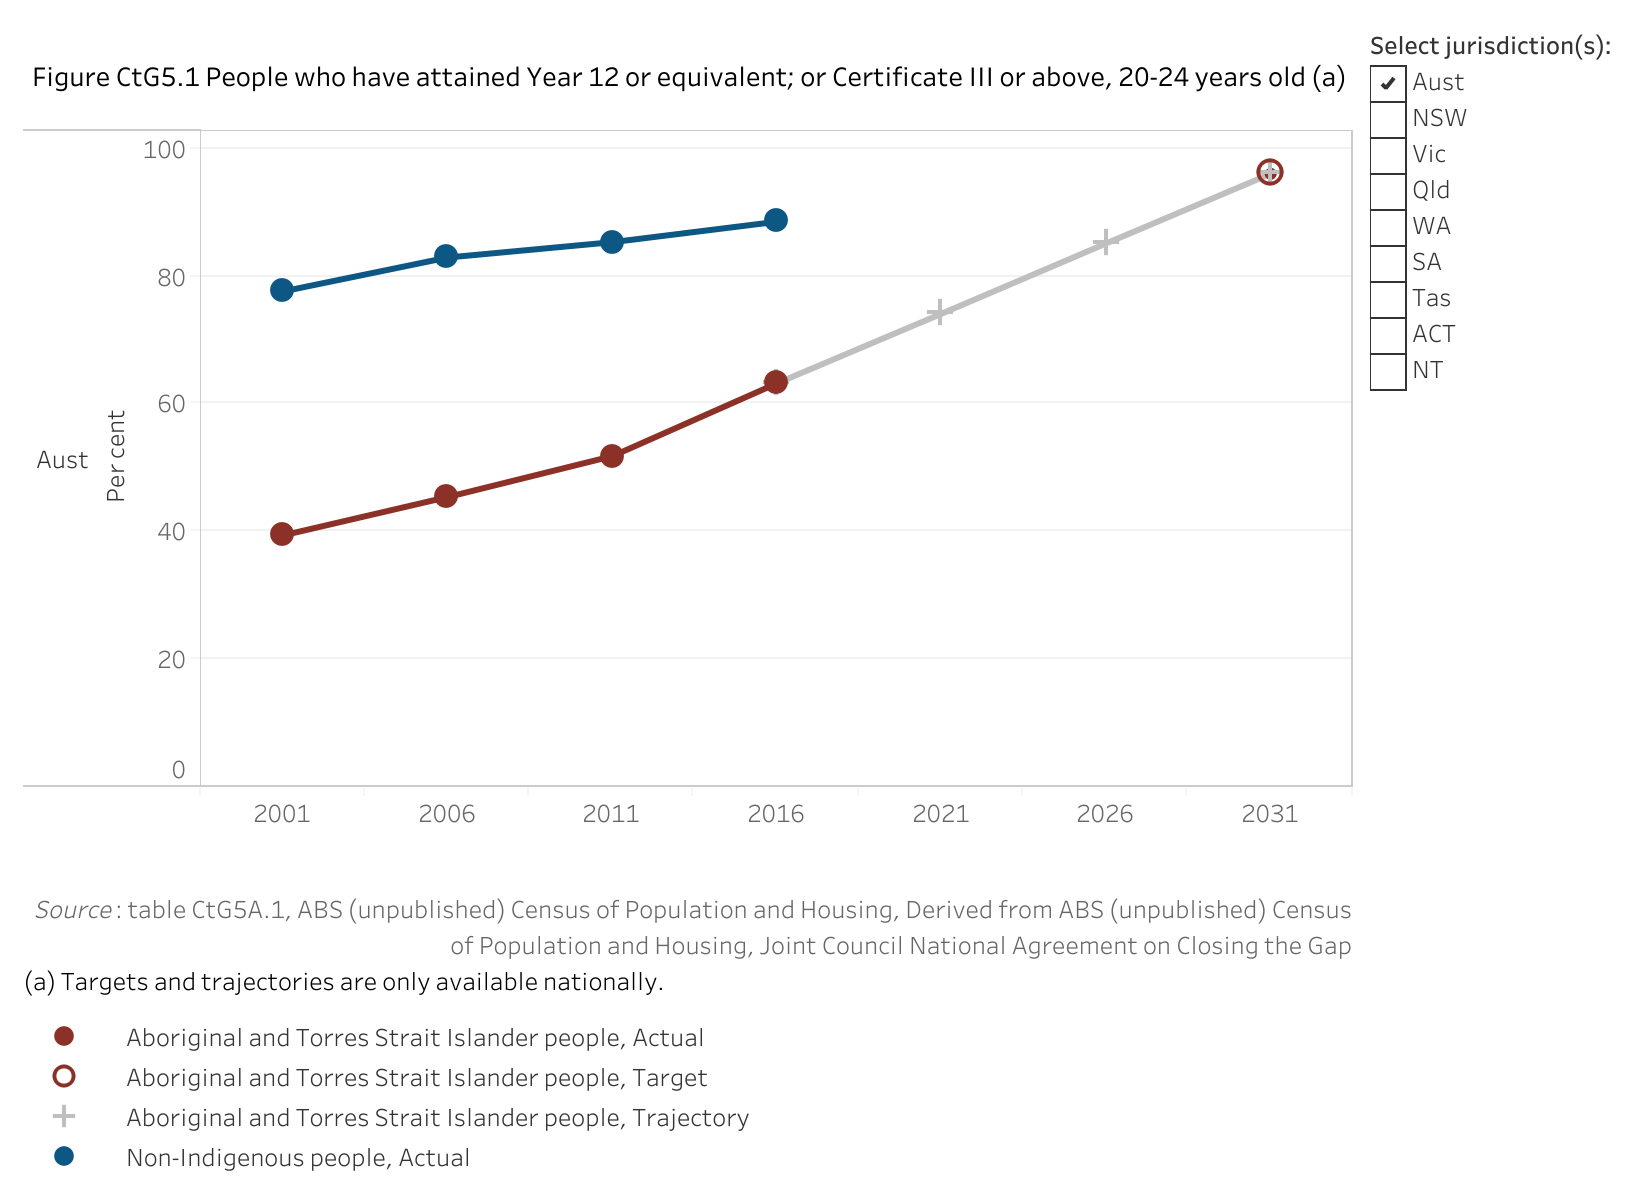 Figure CtG5.1. Line chart showing the proportion of Aboriginal and Torres Strait Islander people and non-Indigenous people (aged 20 to 24 years) who had attained year 12 or equivalent or Certificate level III or above. The aim under Closing the Gap is to increase the proportion for Aboriginal and Torres Strait Islander people from a 2016 baseline value of 63.2 per cent to a target value of 96 per cent by 2031.